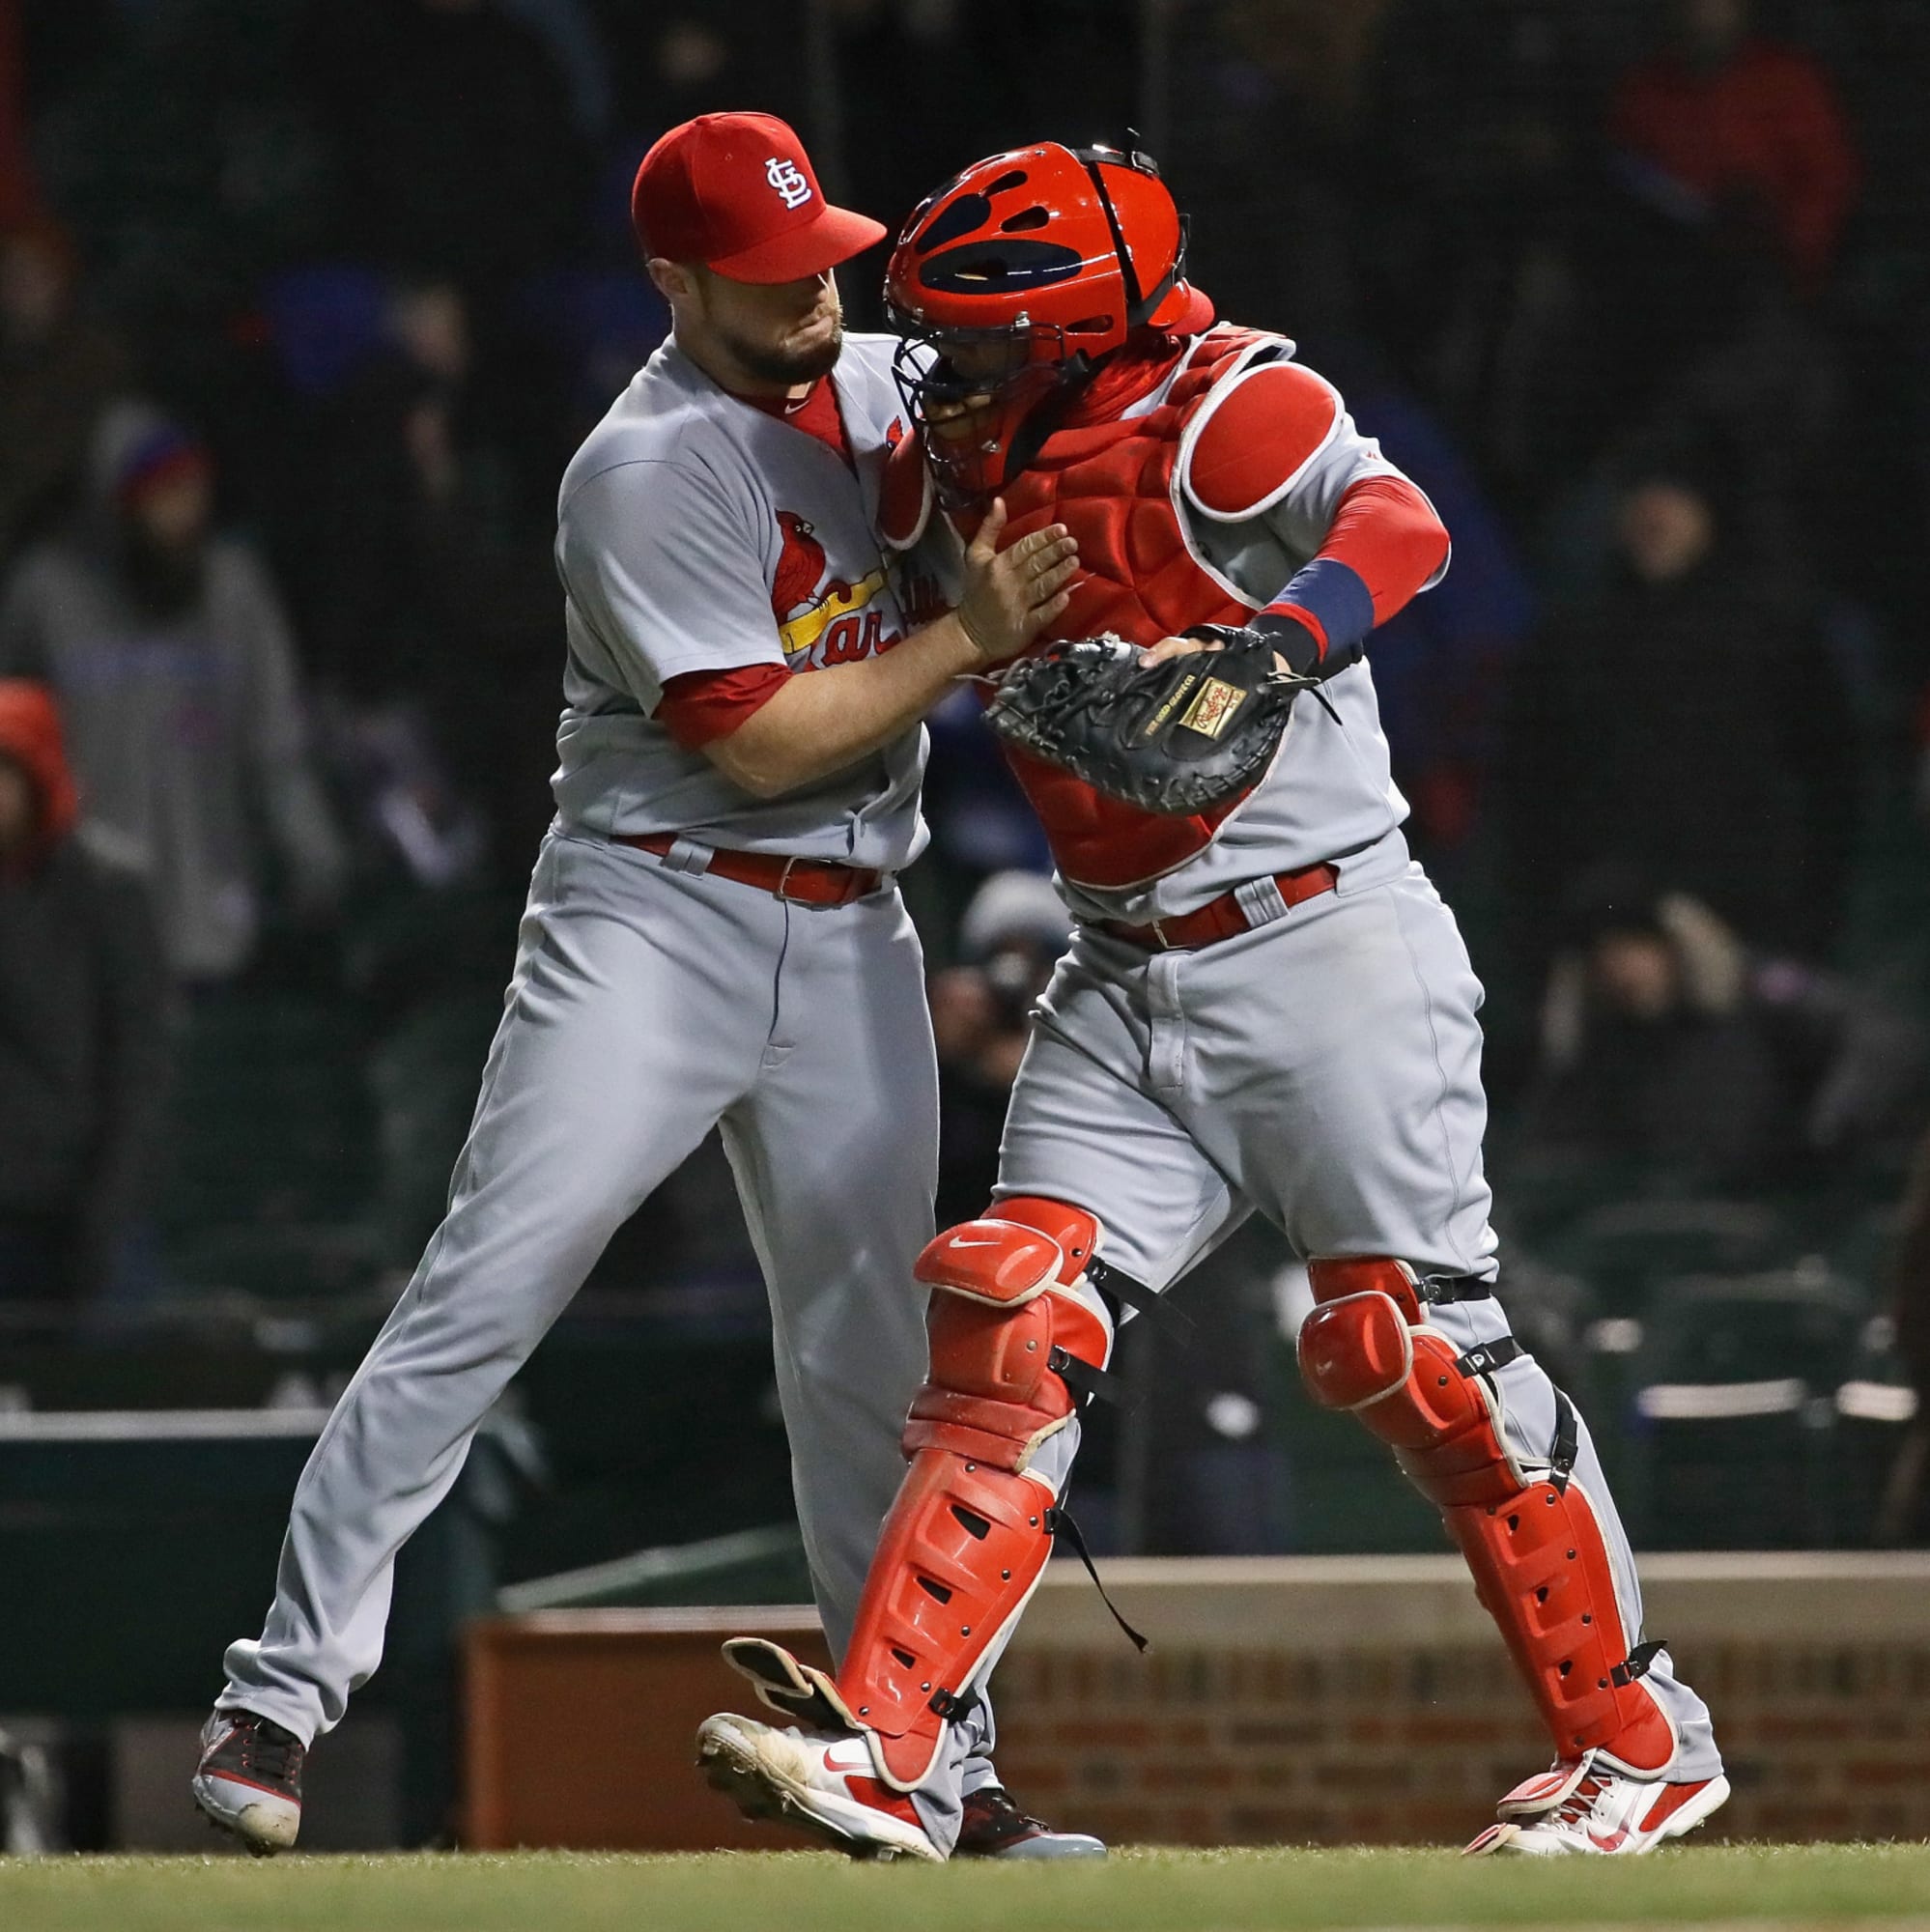 St. Louis Cardinals: Waino bueno in cold weather as Cards down Cubs